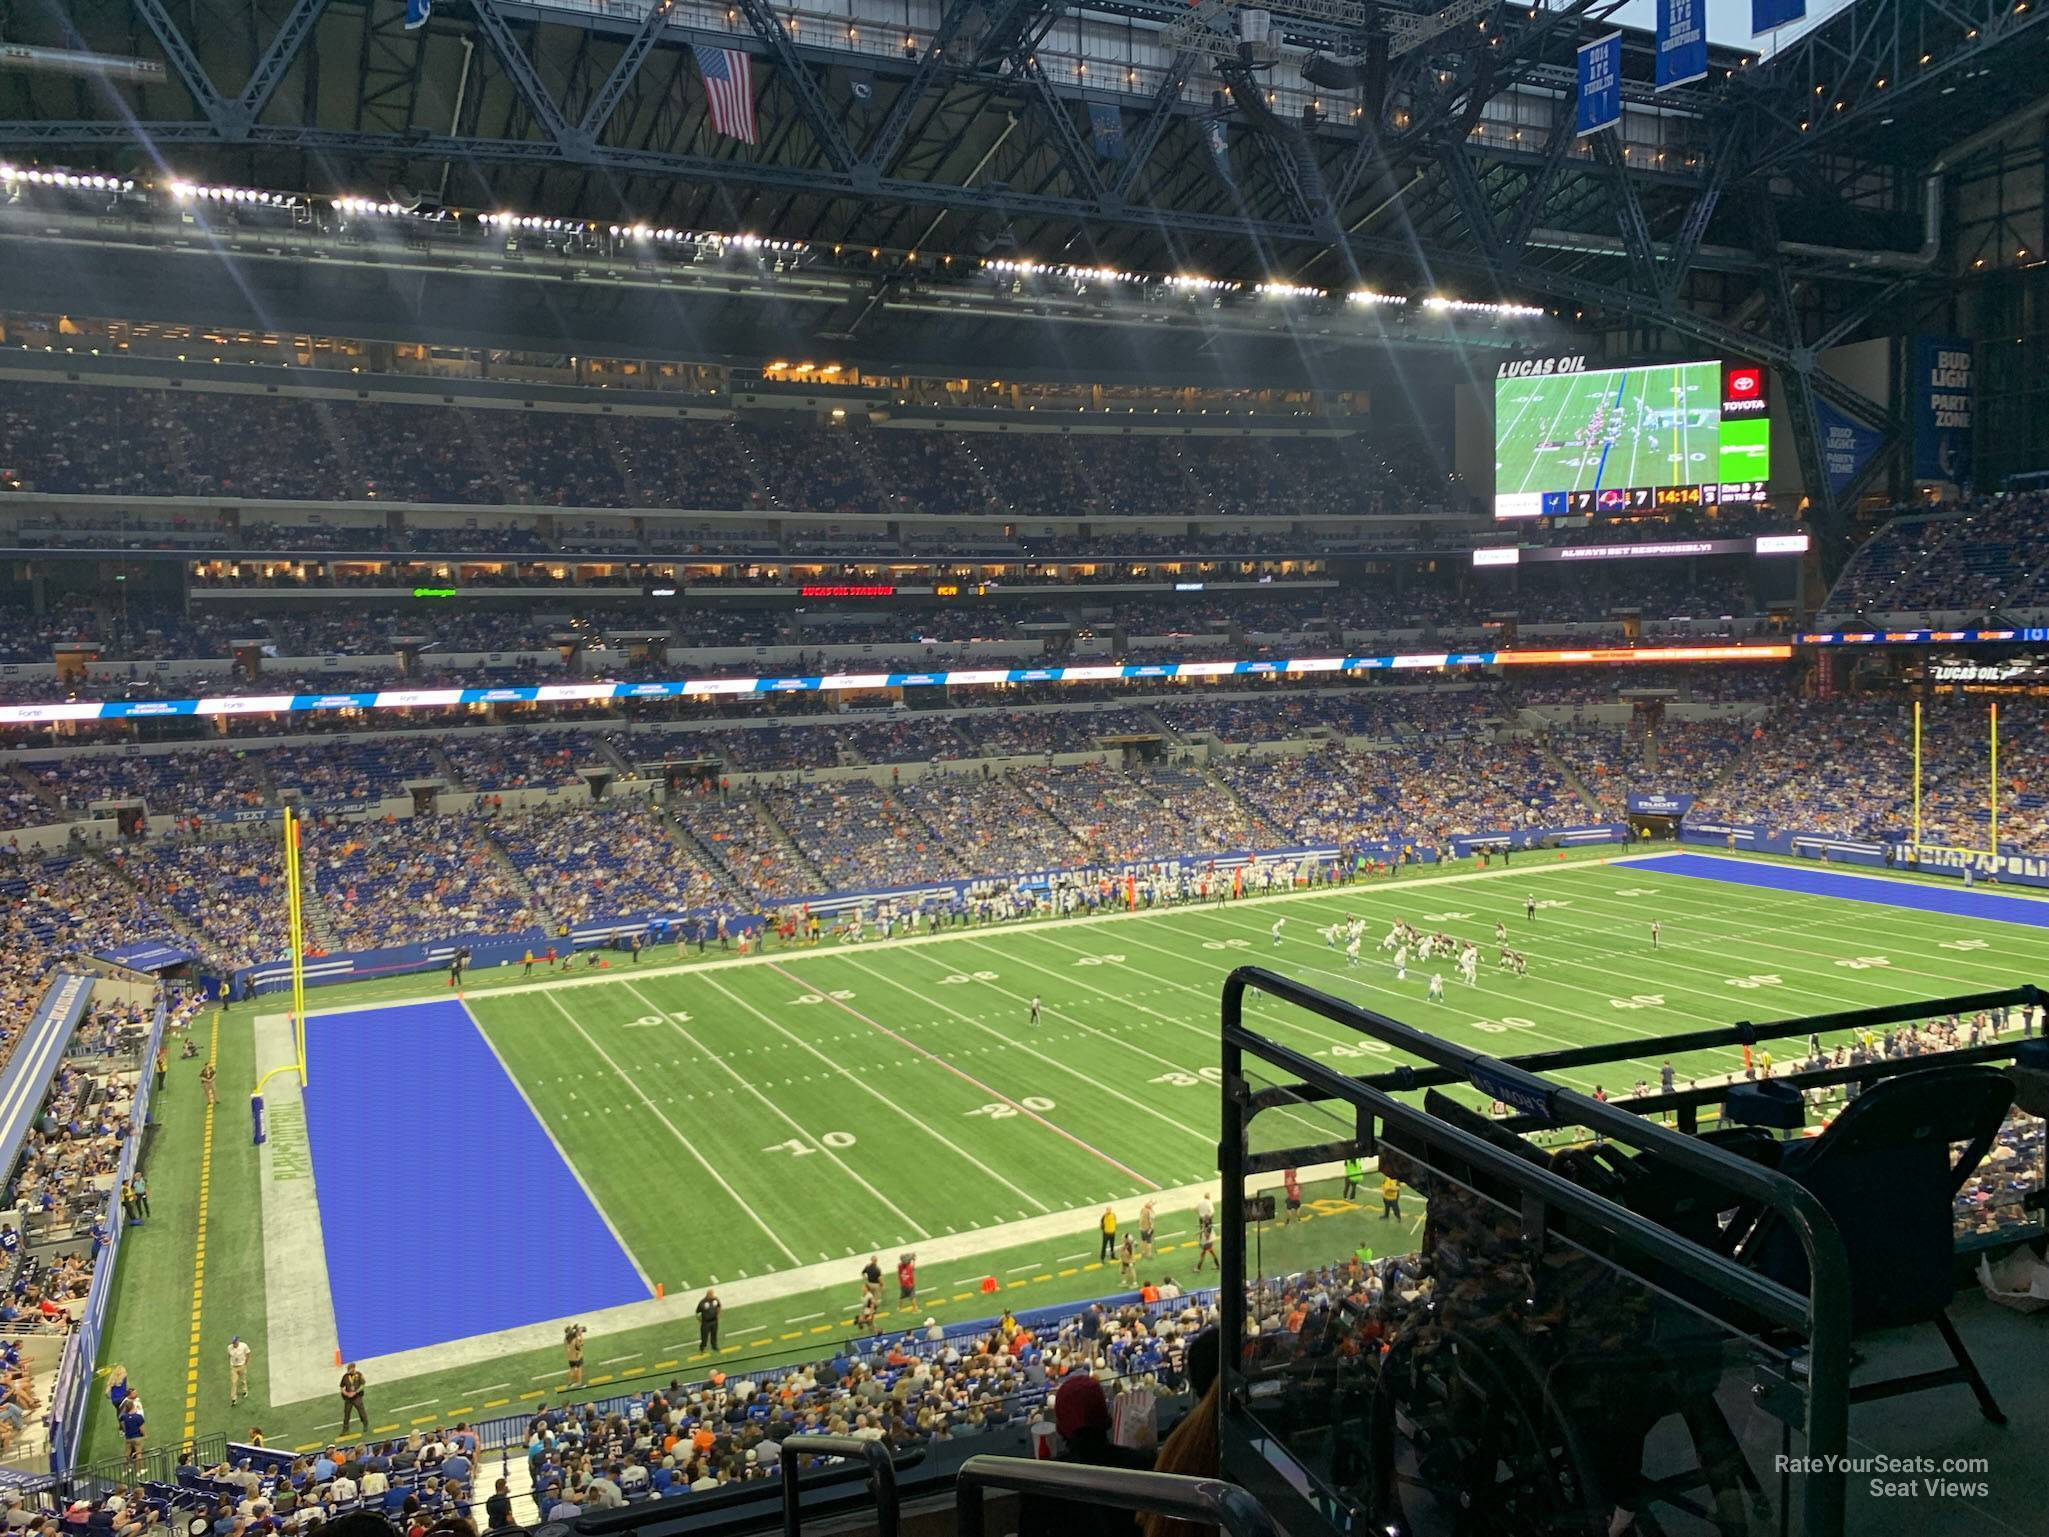 section 319, row 5n seat view  for football - lucas oil stadium